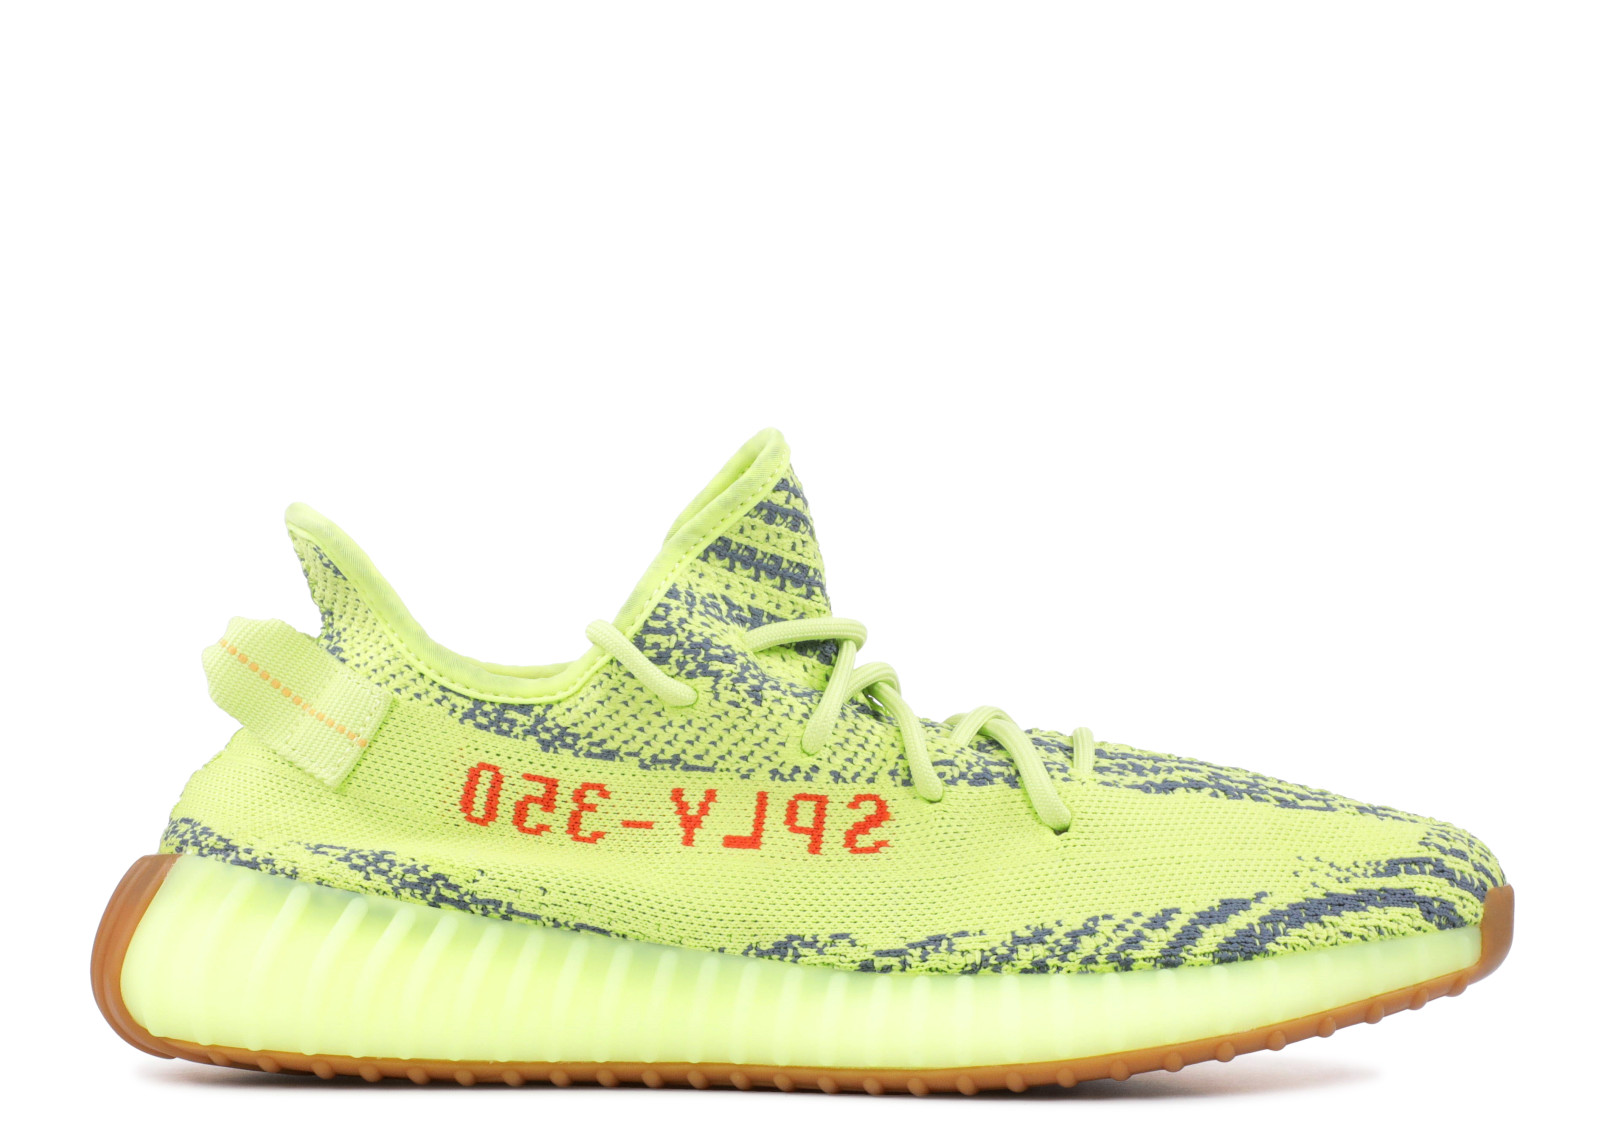 Adidas Yeezy Boost 350 V2 Semi Frozen Yellow - Authentic Sneakers